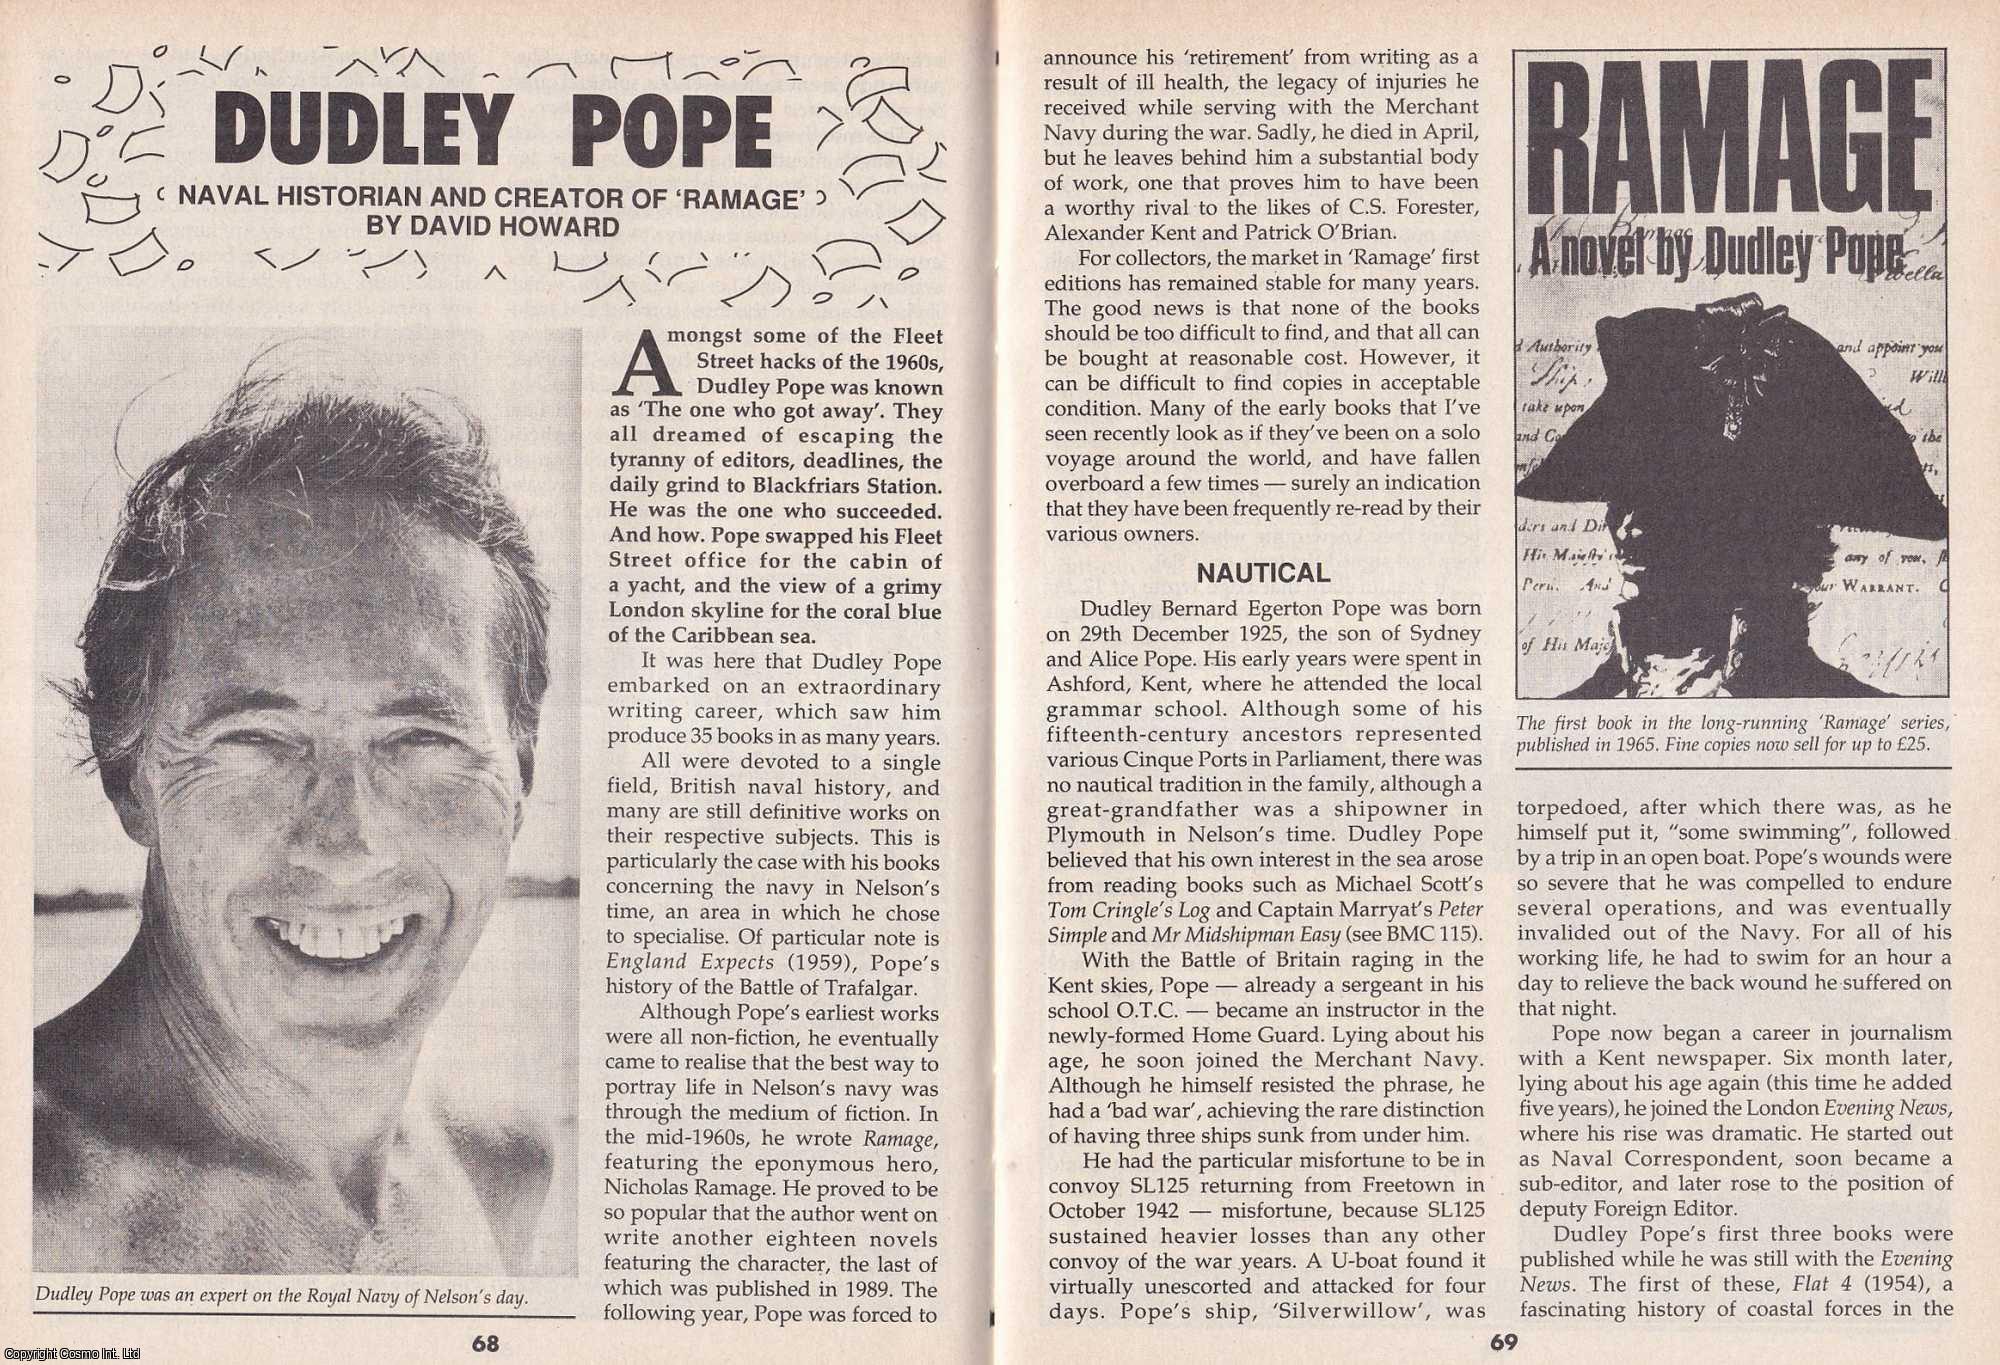 David Howard - Dudley Pope : Naval Historian and Creator of Ramage. This is an original article separated from an issue of The Book & Magazine Collector publication, 1997.